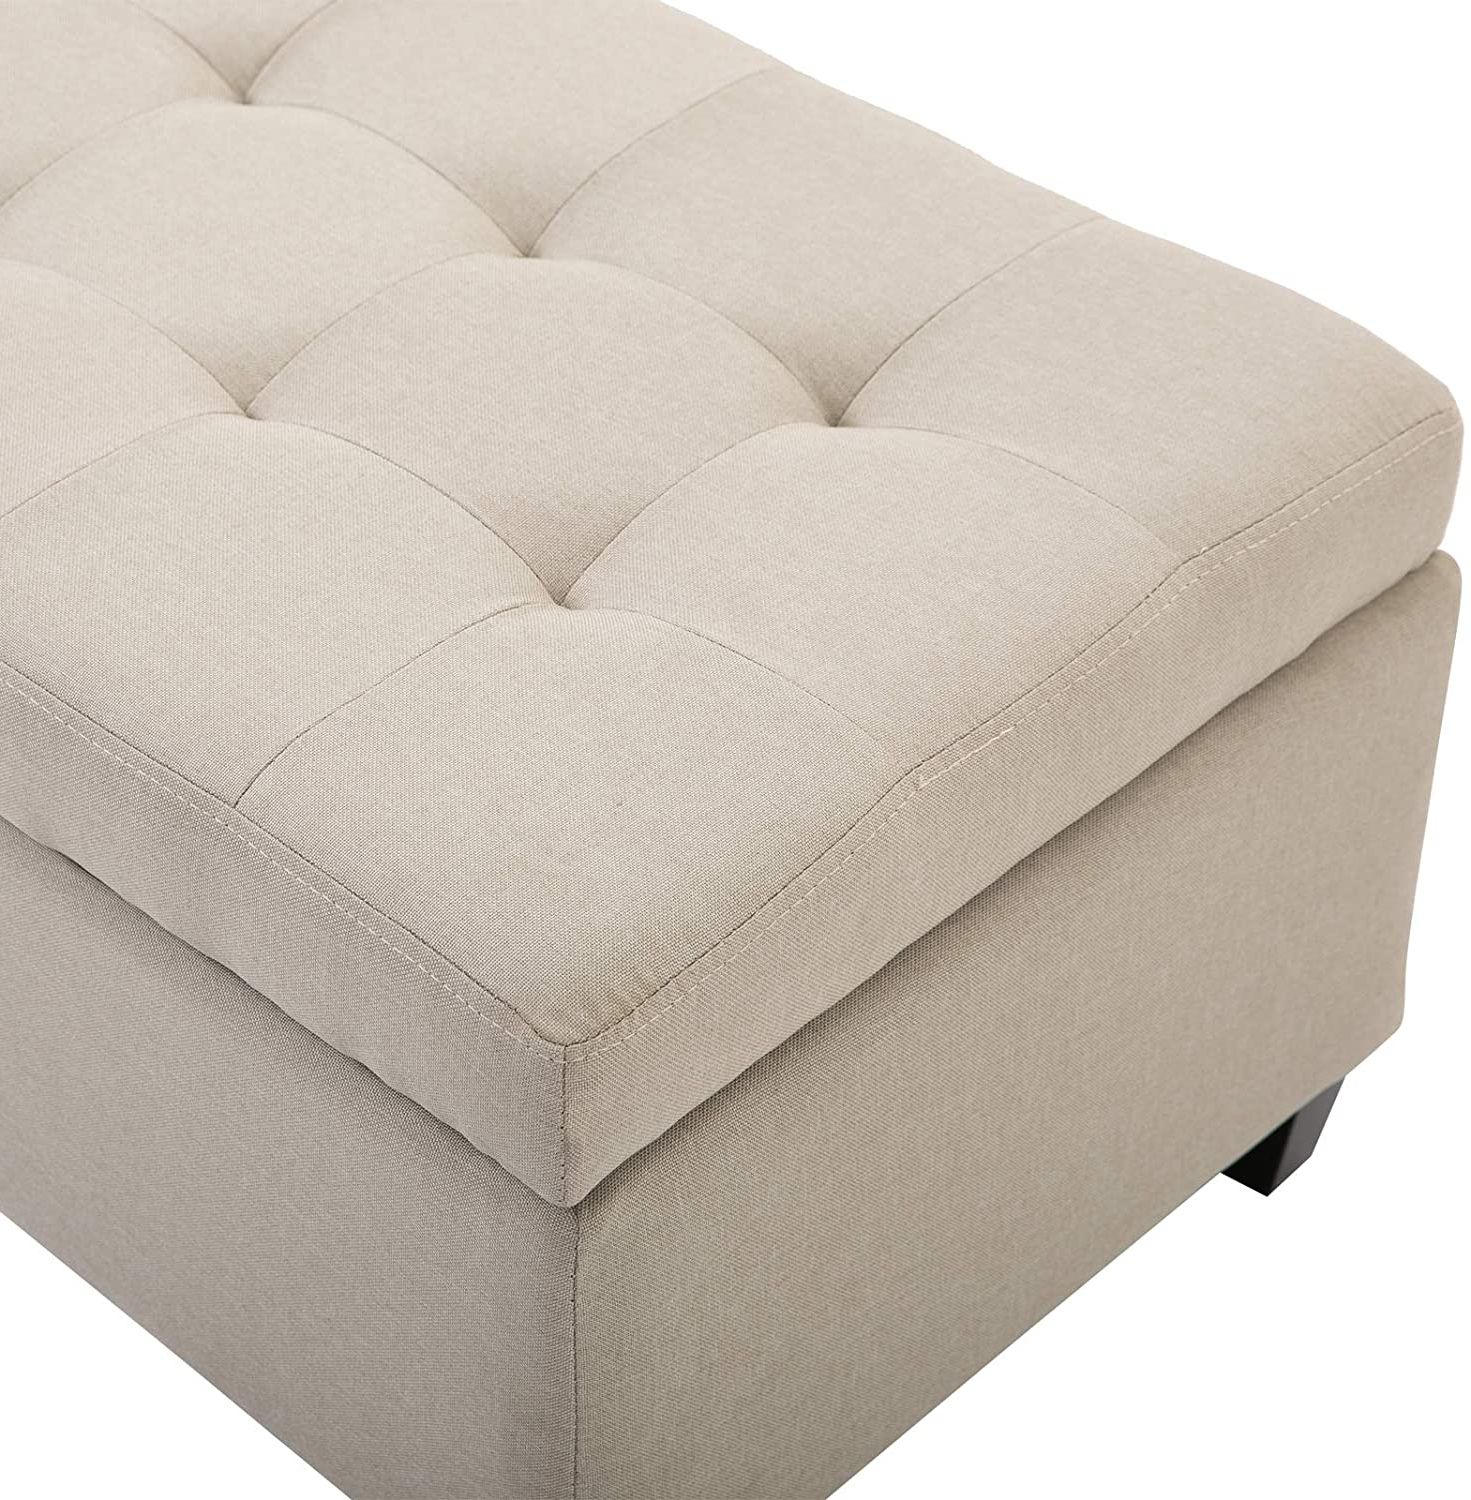 51" Large Tufted Linen Fabric Ottoman Storage Bench With Soft Close Top Inside Famous Cream Wool Felted Pouf Ottomans (View 1 of 10)